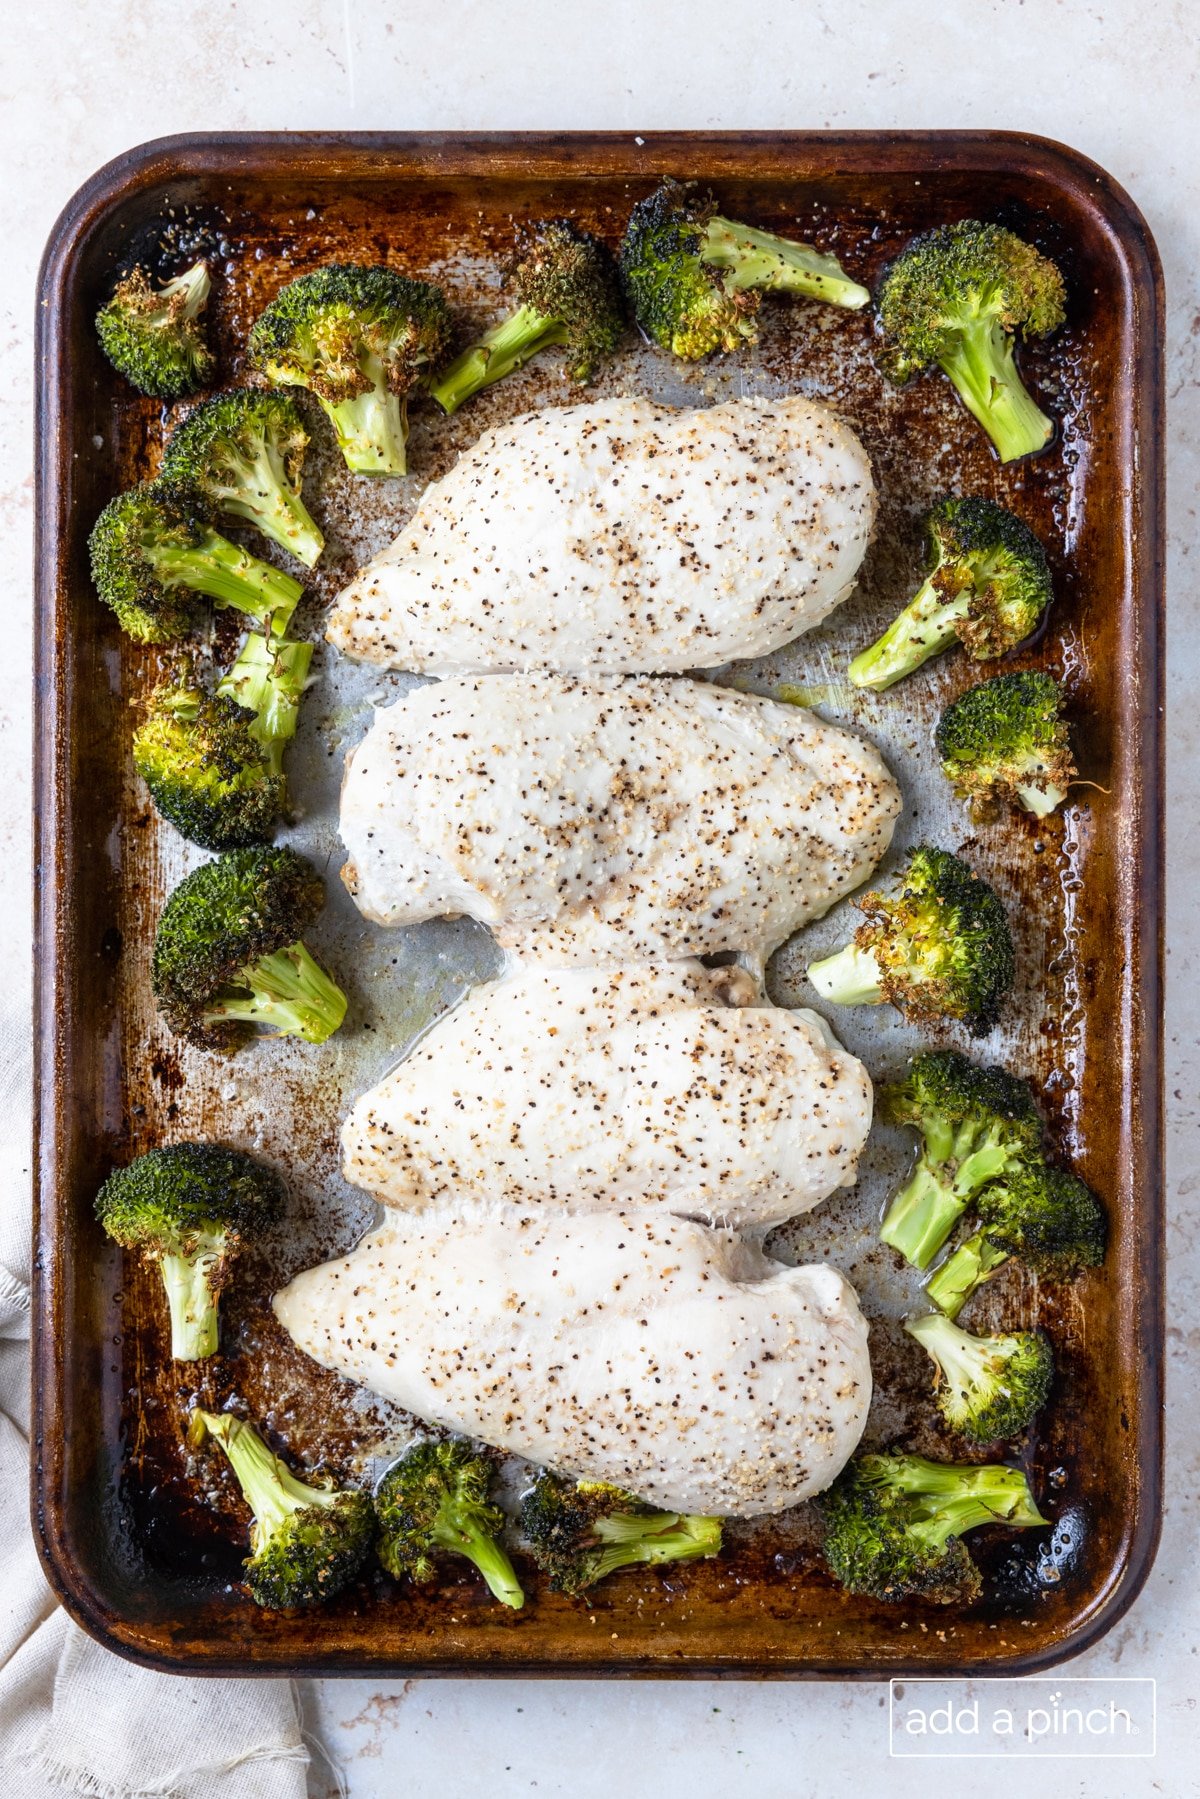 Baked chicken and broccoli ready for the parmesan crust.